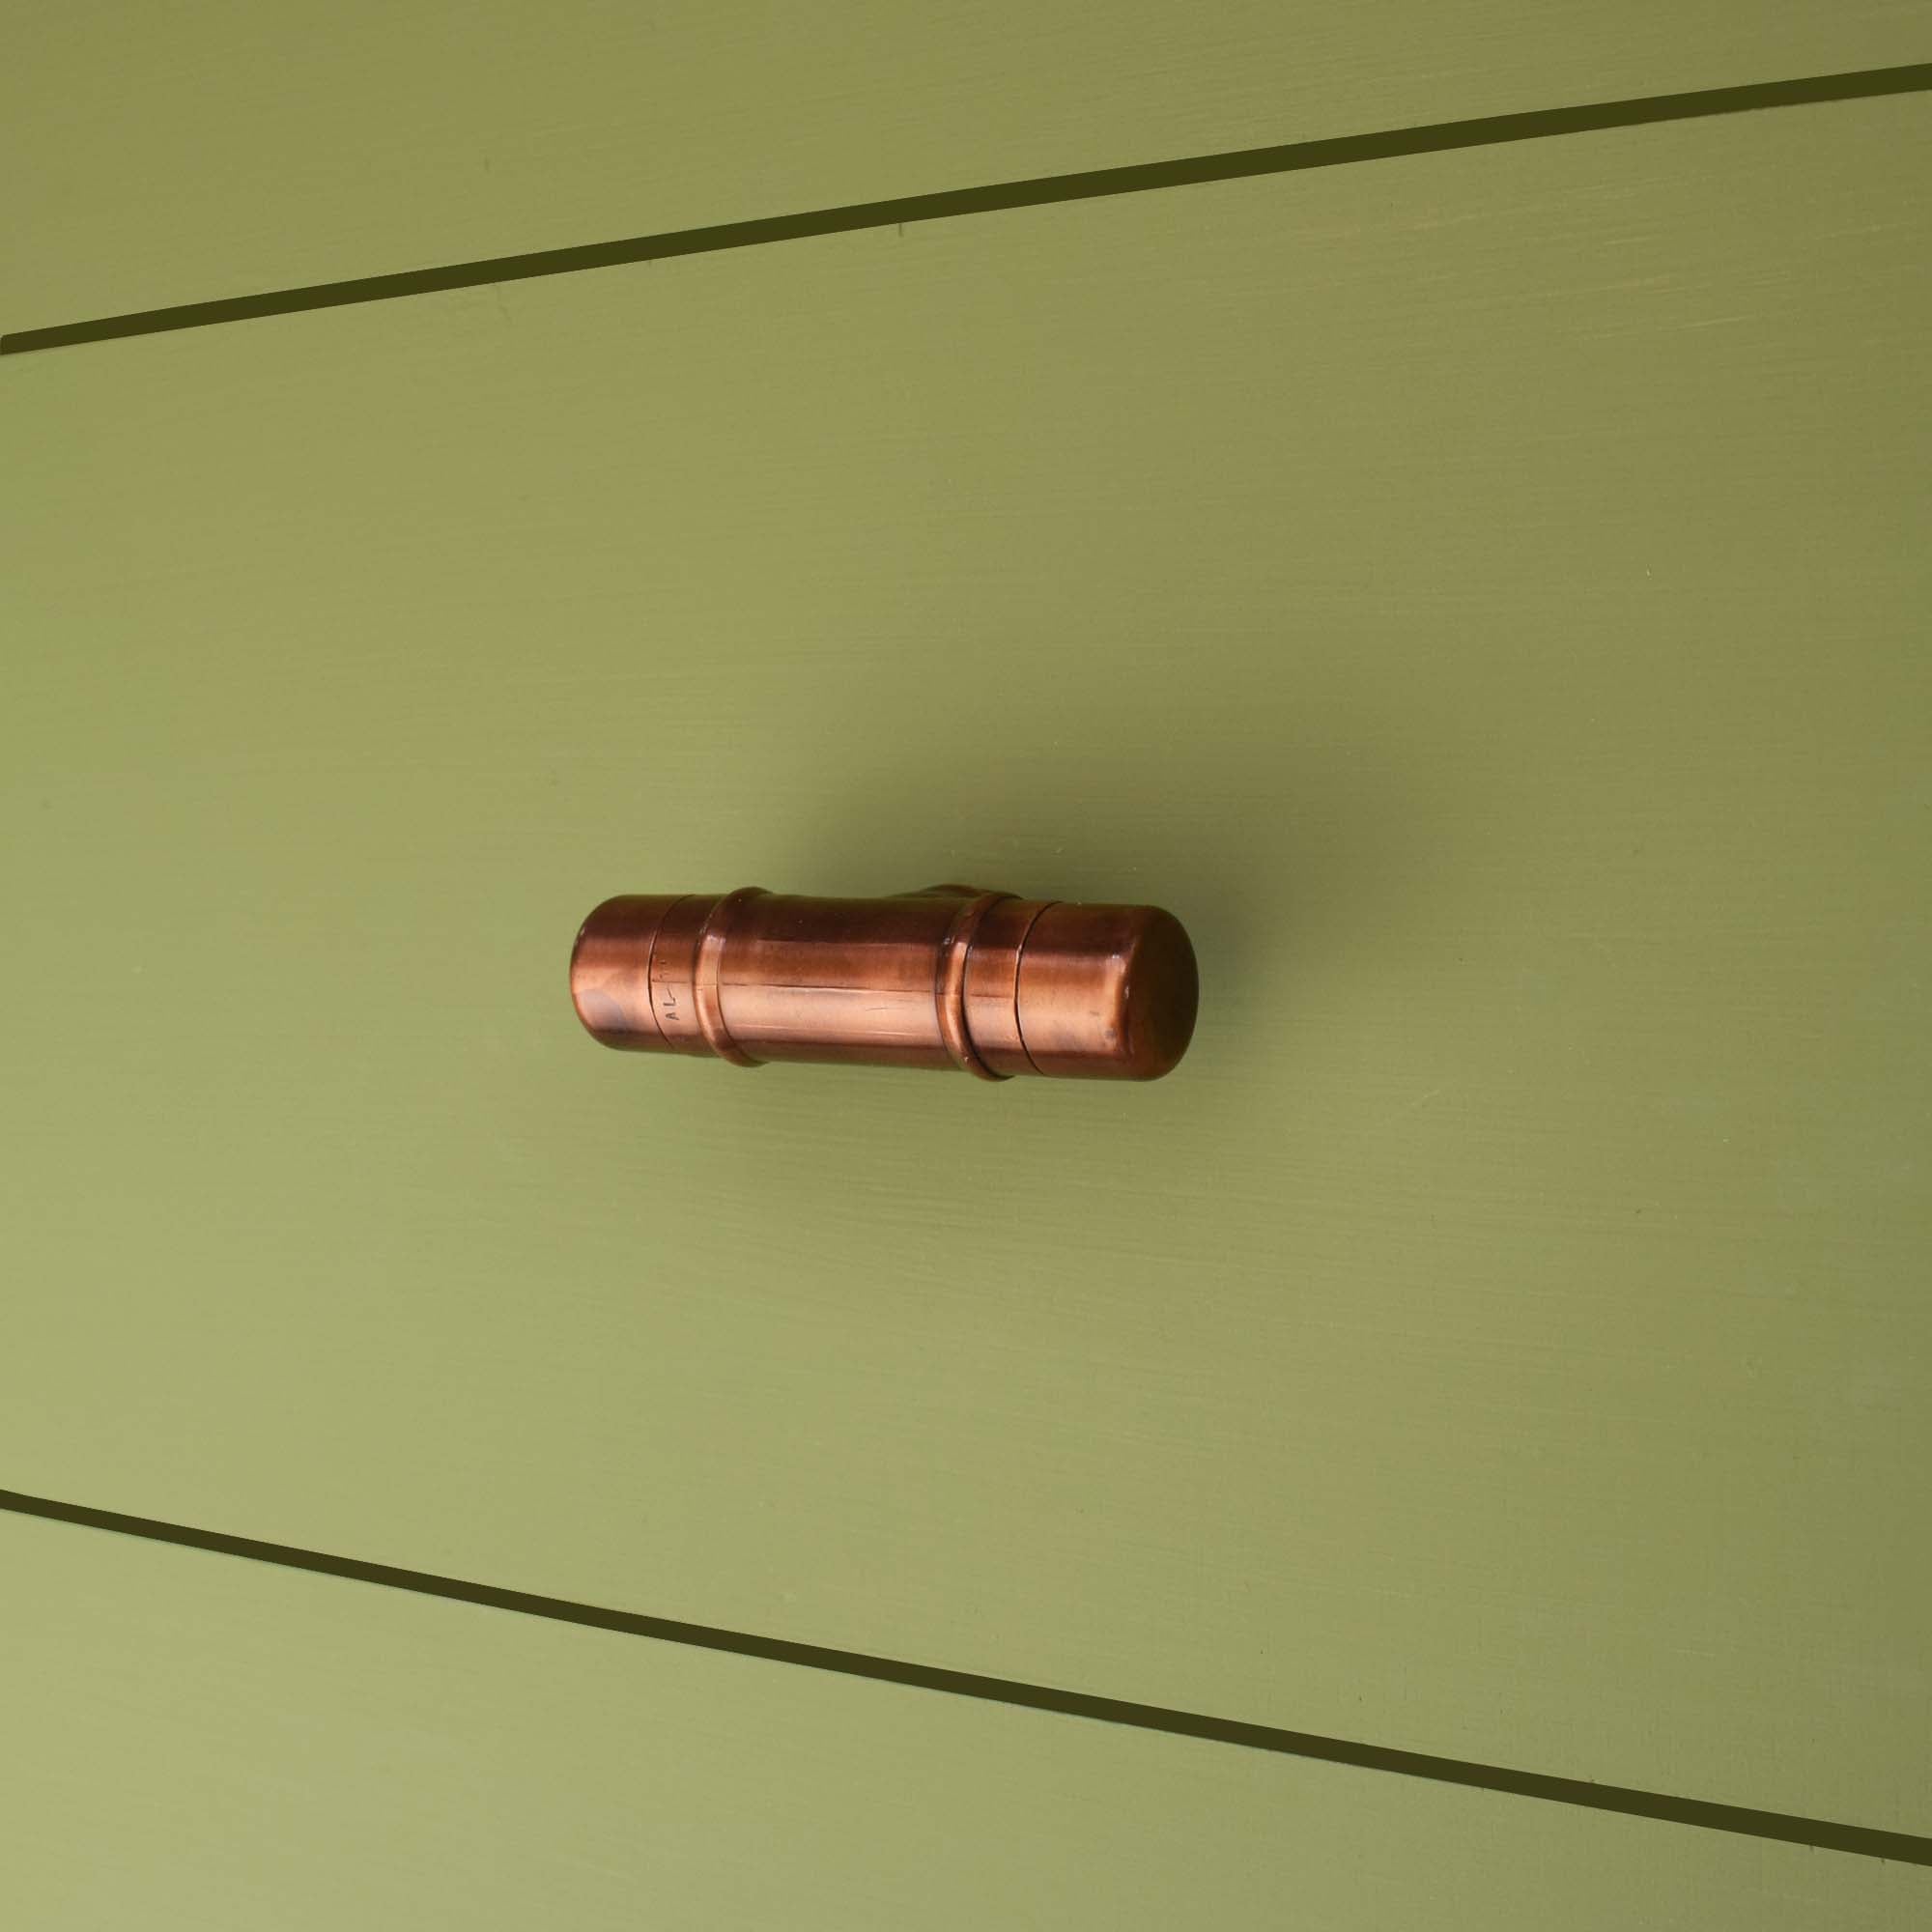 Copper Knob T-shaped - Aged - On Green Drawers